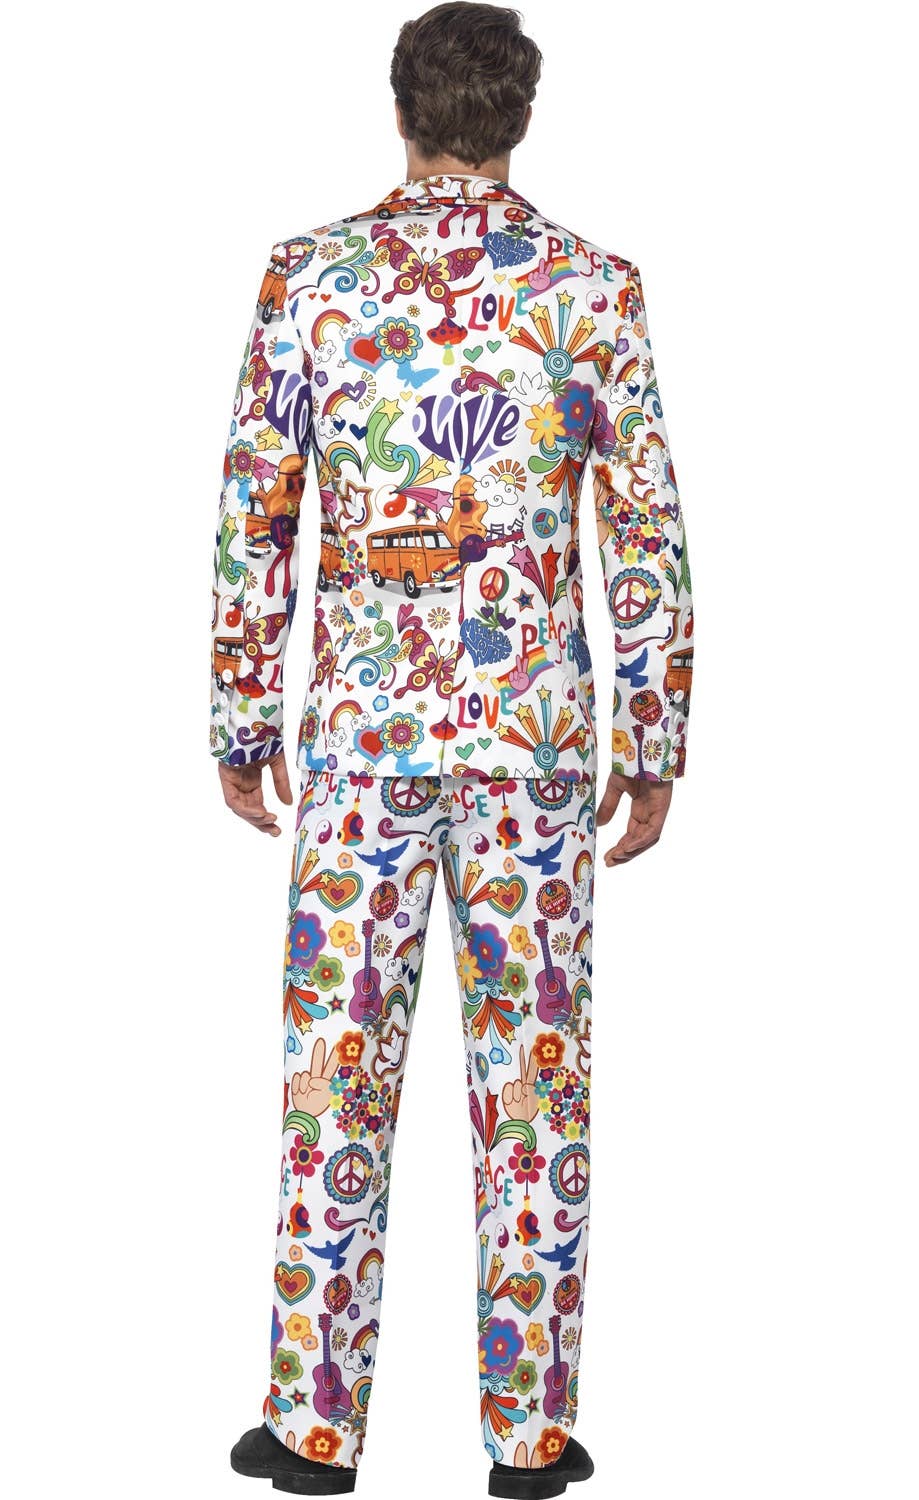 Groovy Print Retro Men's Stand Out 70s Dress Up Suit - Back Image